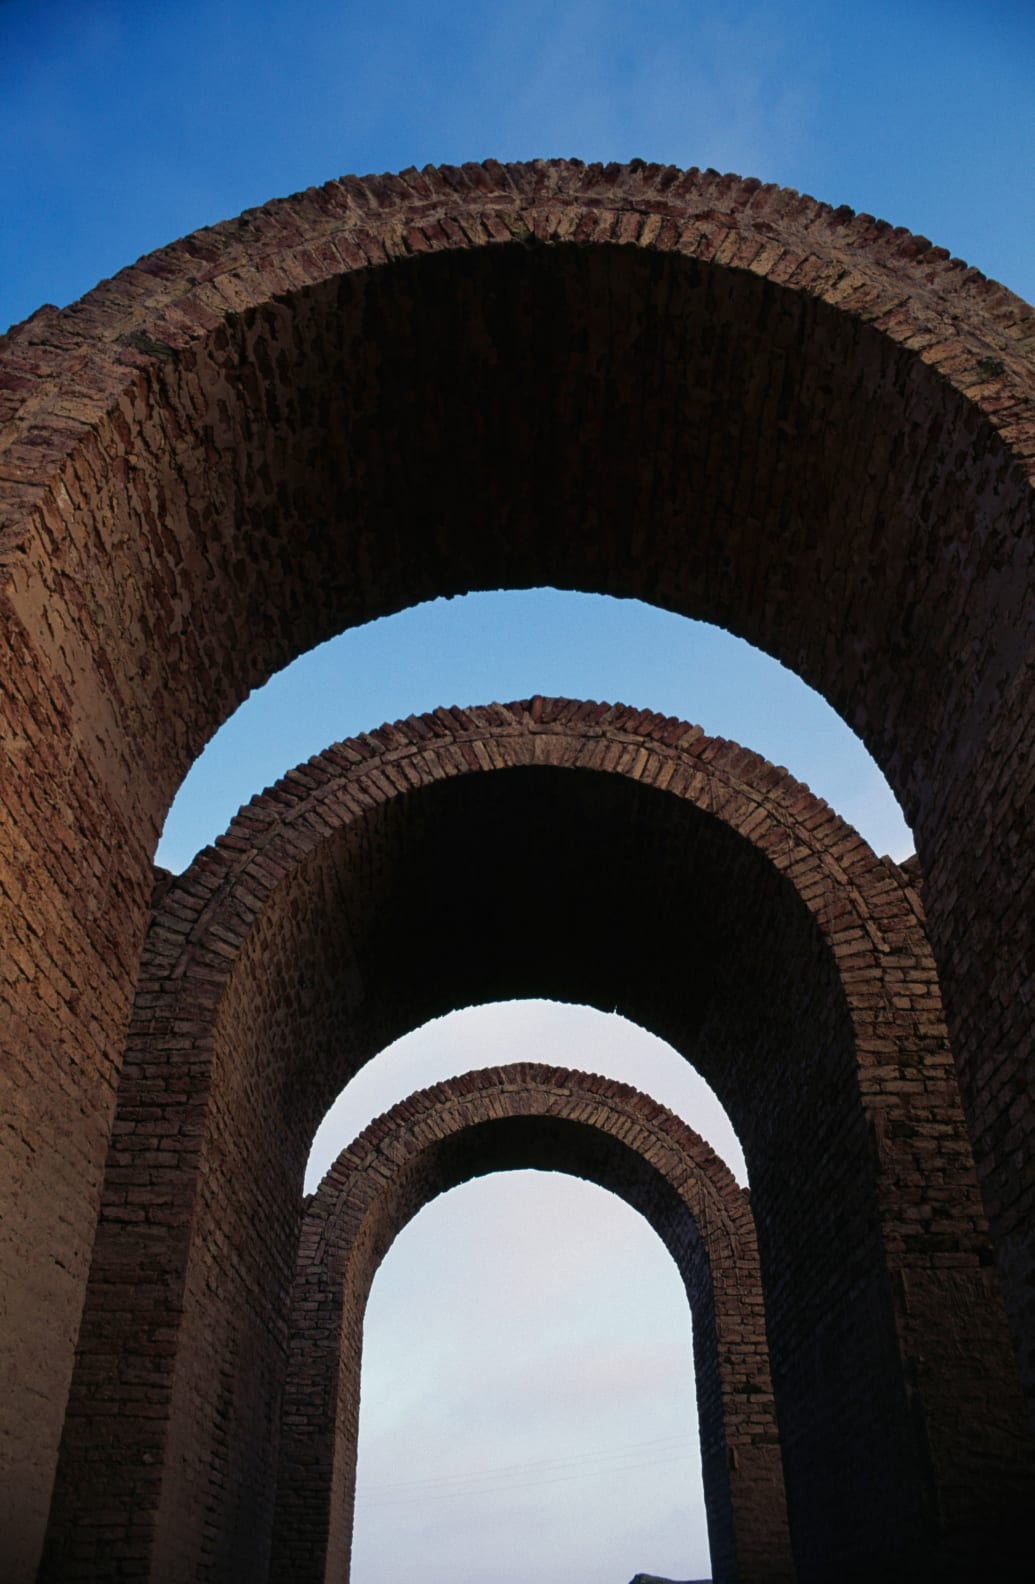 A photograph of the arches of a building in Assur or Qal'at Shirqat,a Unesco World Heritage Site in Iraq.